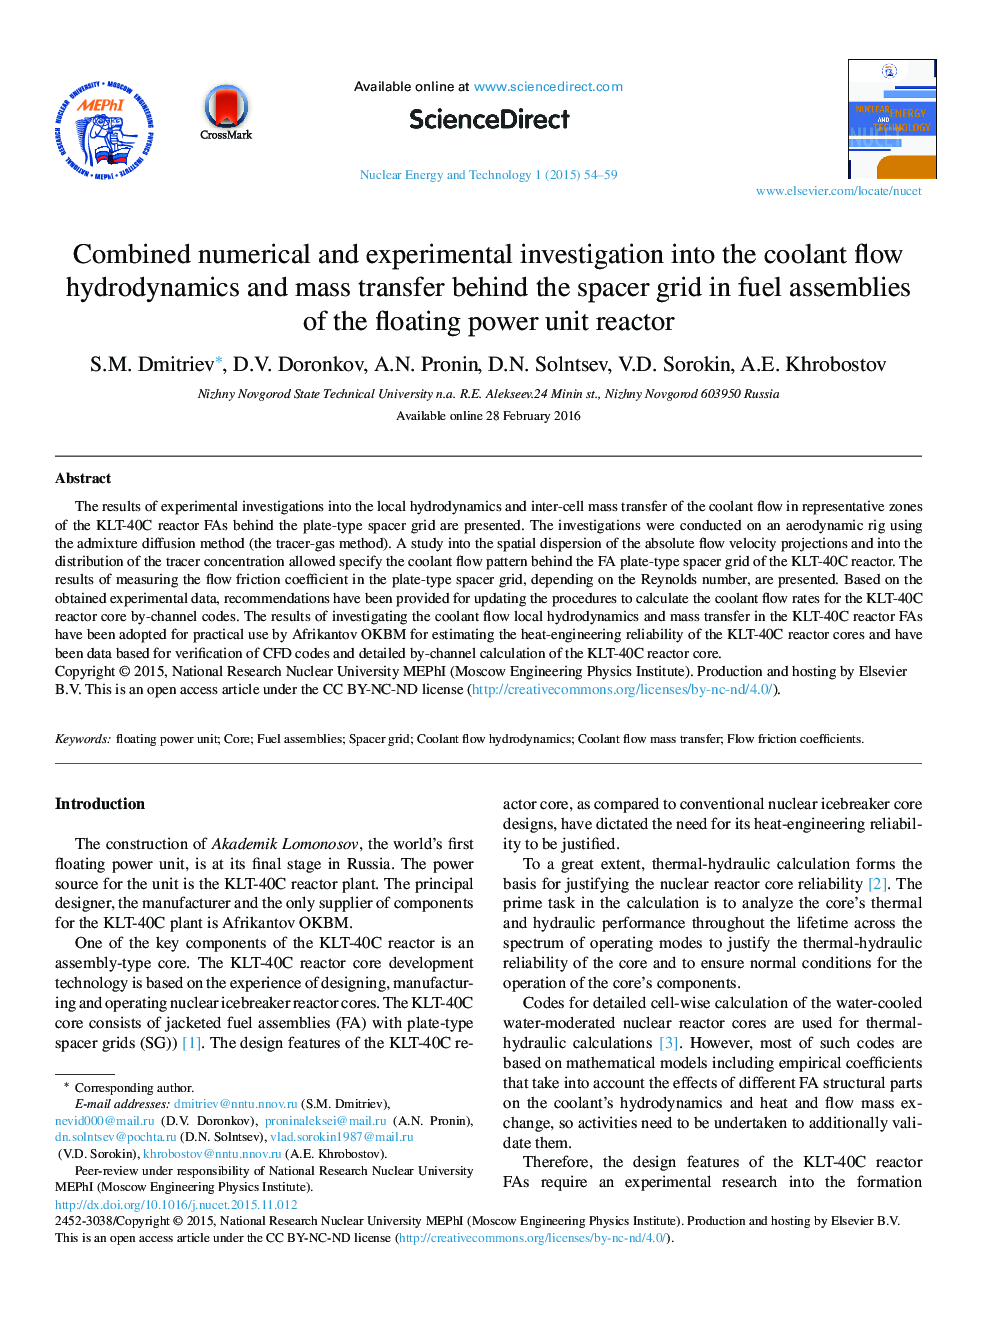 Combined numerical and experimental investigation into the coolant flow hydrodynamics and mass transfer behind the spacer grid in fuel assemblies of the floating power unit reactor